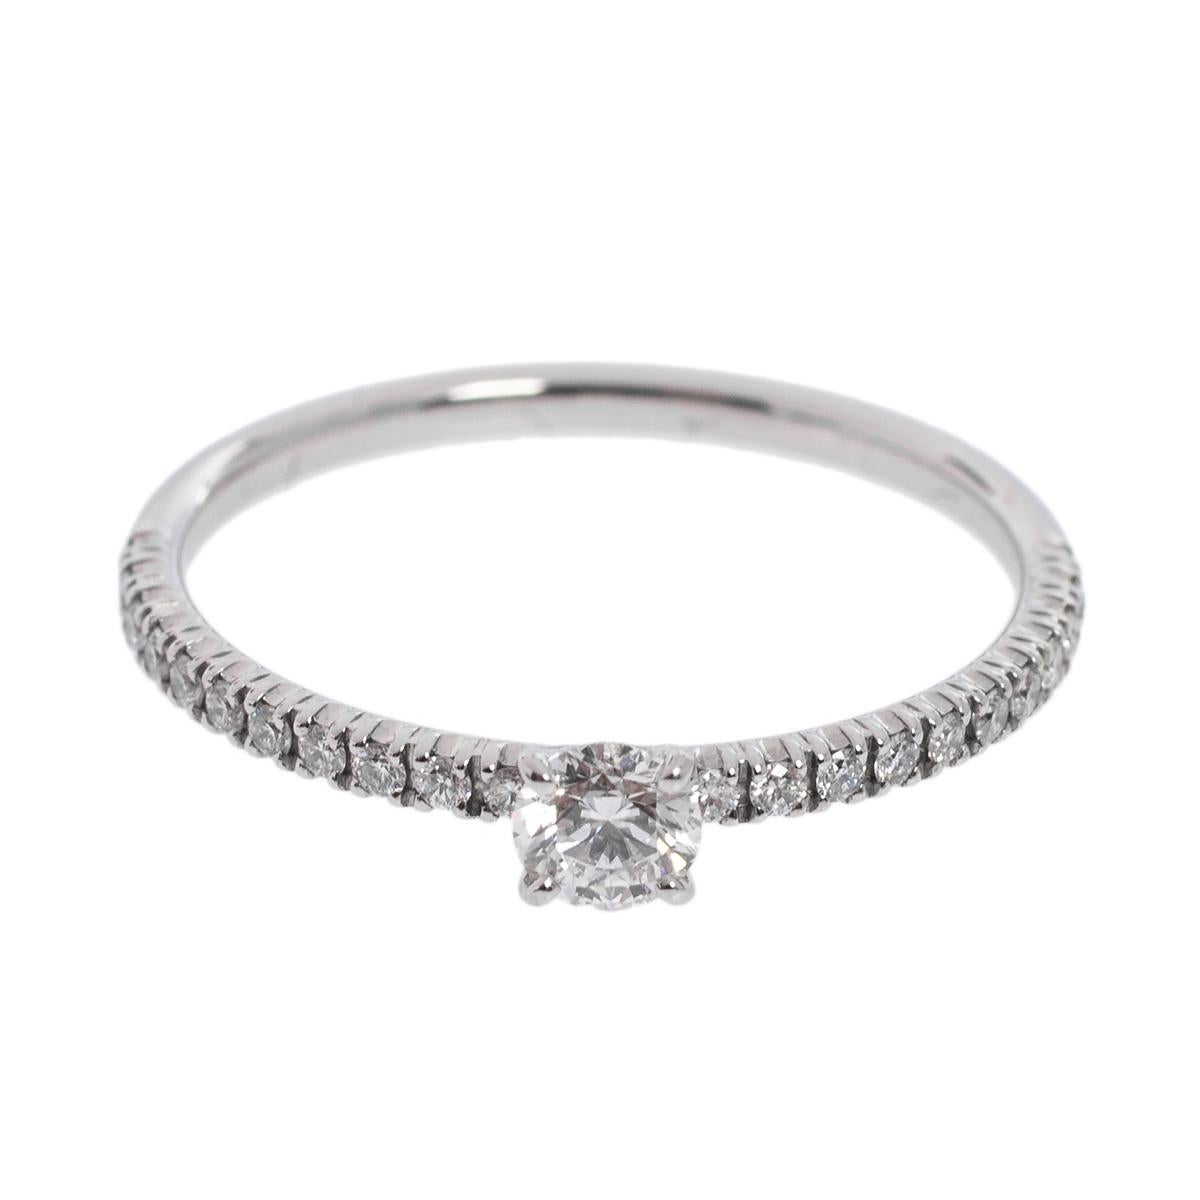 This simple yet classy band ring from Cartier personifies pure elegance. The Étincelle de Cartier collection is known for evoking pure, feminine charm through simple designs and shimmering diamonds, ideal for modern couples who like fashion,